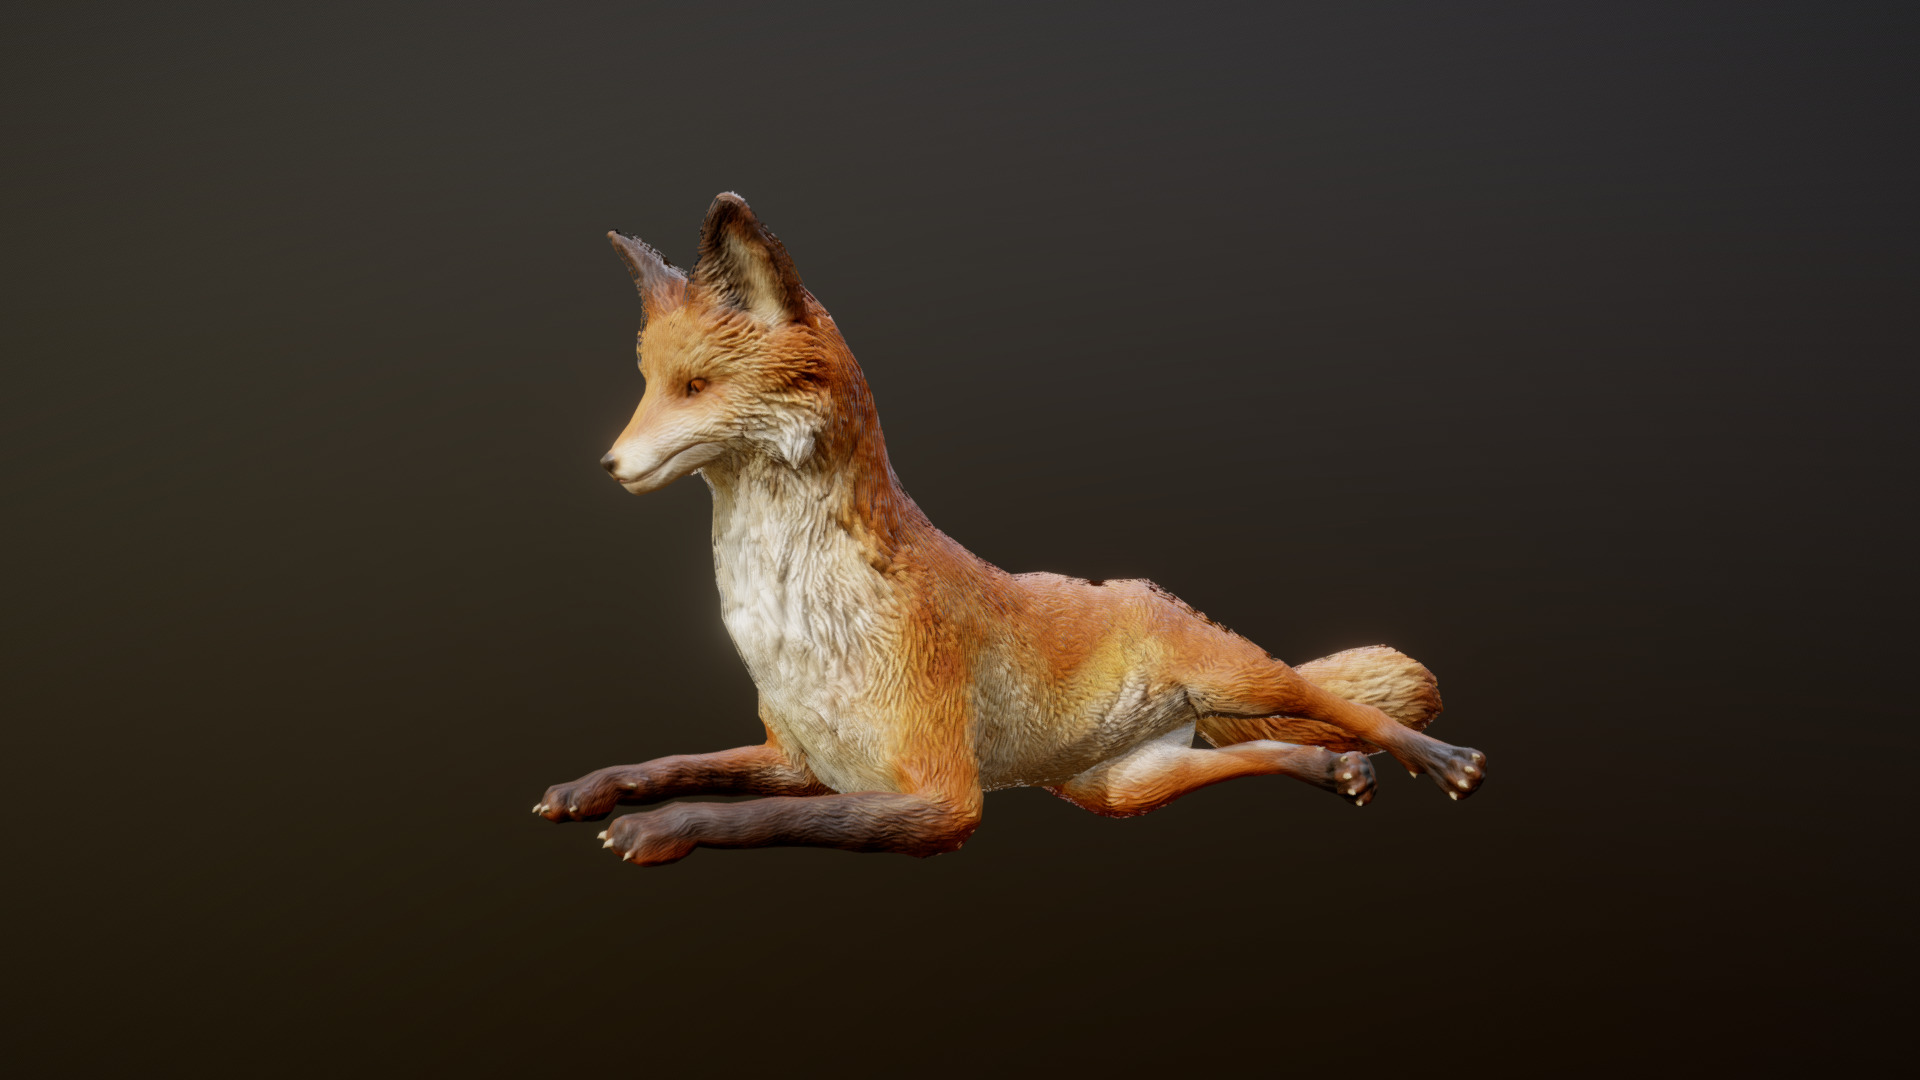 3D model FOX ANIMATIONS - This is a 3D model of the FOX ANIMATIONS. The 3D model is about a kangaroo sitting on a black background.